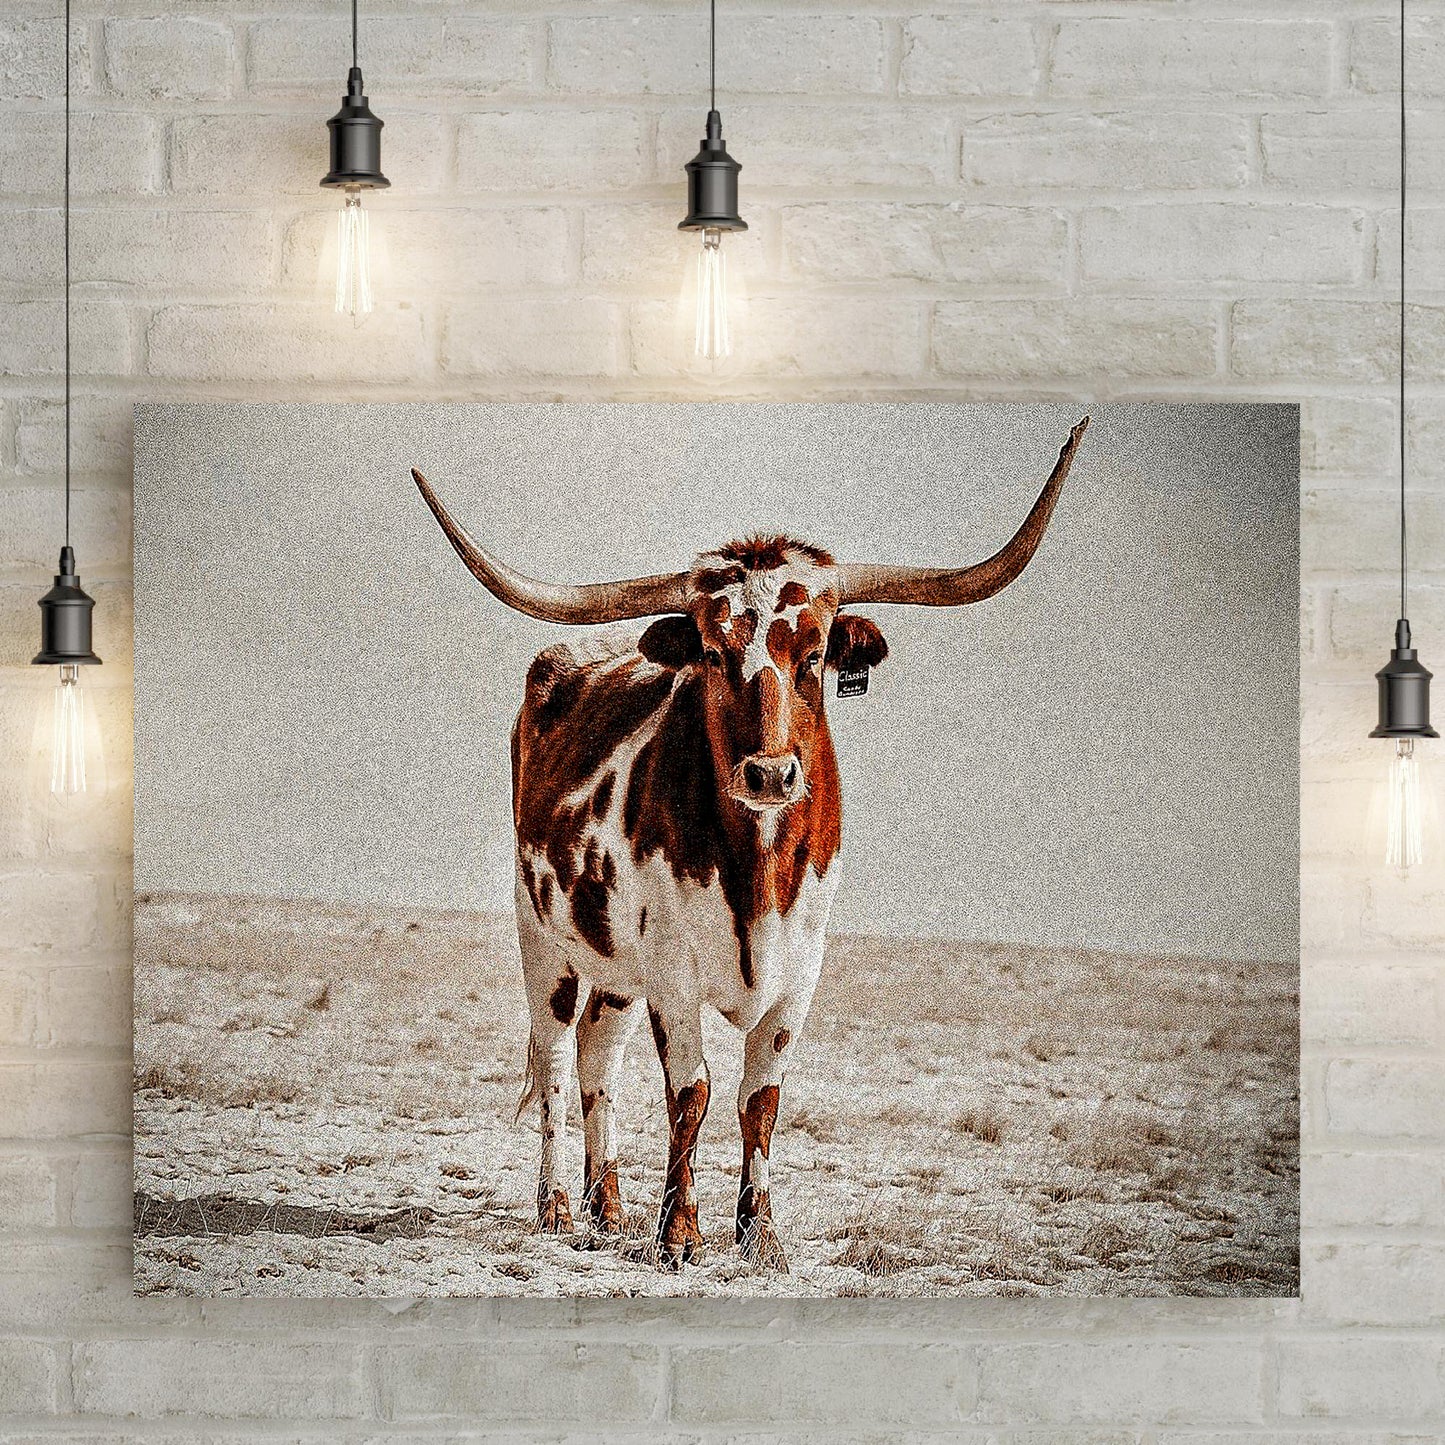 Vintage Longhorn Cattle Canvas Wall Art - Image by Tailored Canvases